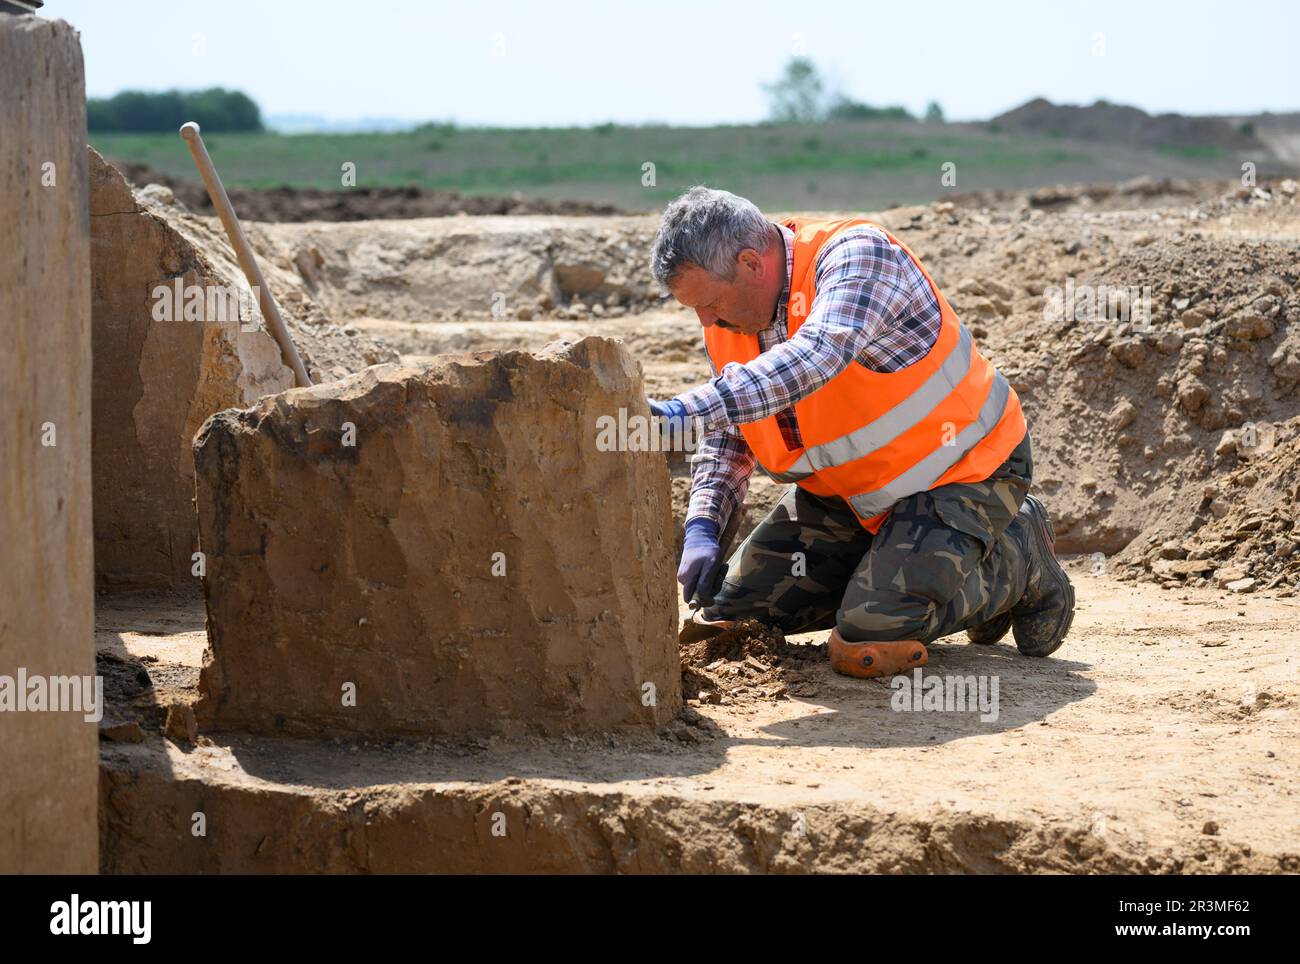 24 May 2023, Saxony, Döbeln: An employee of the Saxony State Office for Archaeology works during excavations on the construction site of the future 'Karls Erlebnisdorf'. Since fall 2021, the Saxony State Office for Archaeology has been conducting extensive excavations on the 17-hectare site of the future adventure village near Döbeln. With its wealth of finds and immense size, the site near Döbeln-Gärtitz is one of the largest settlement sites of the Early Neolithic period (5,500 - 4,500 BC) in the Middle Saxon loess region known to date. Photo: Robert Michael/dpa Stock Photo